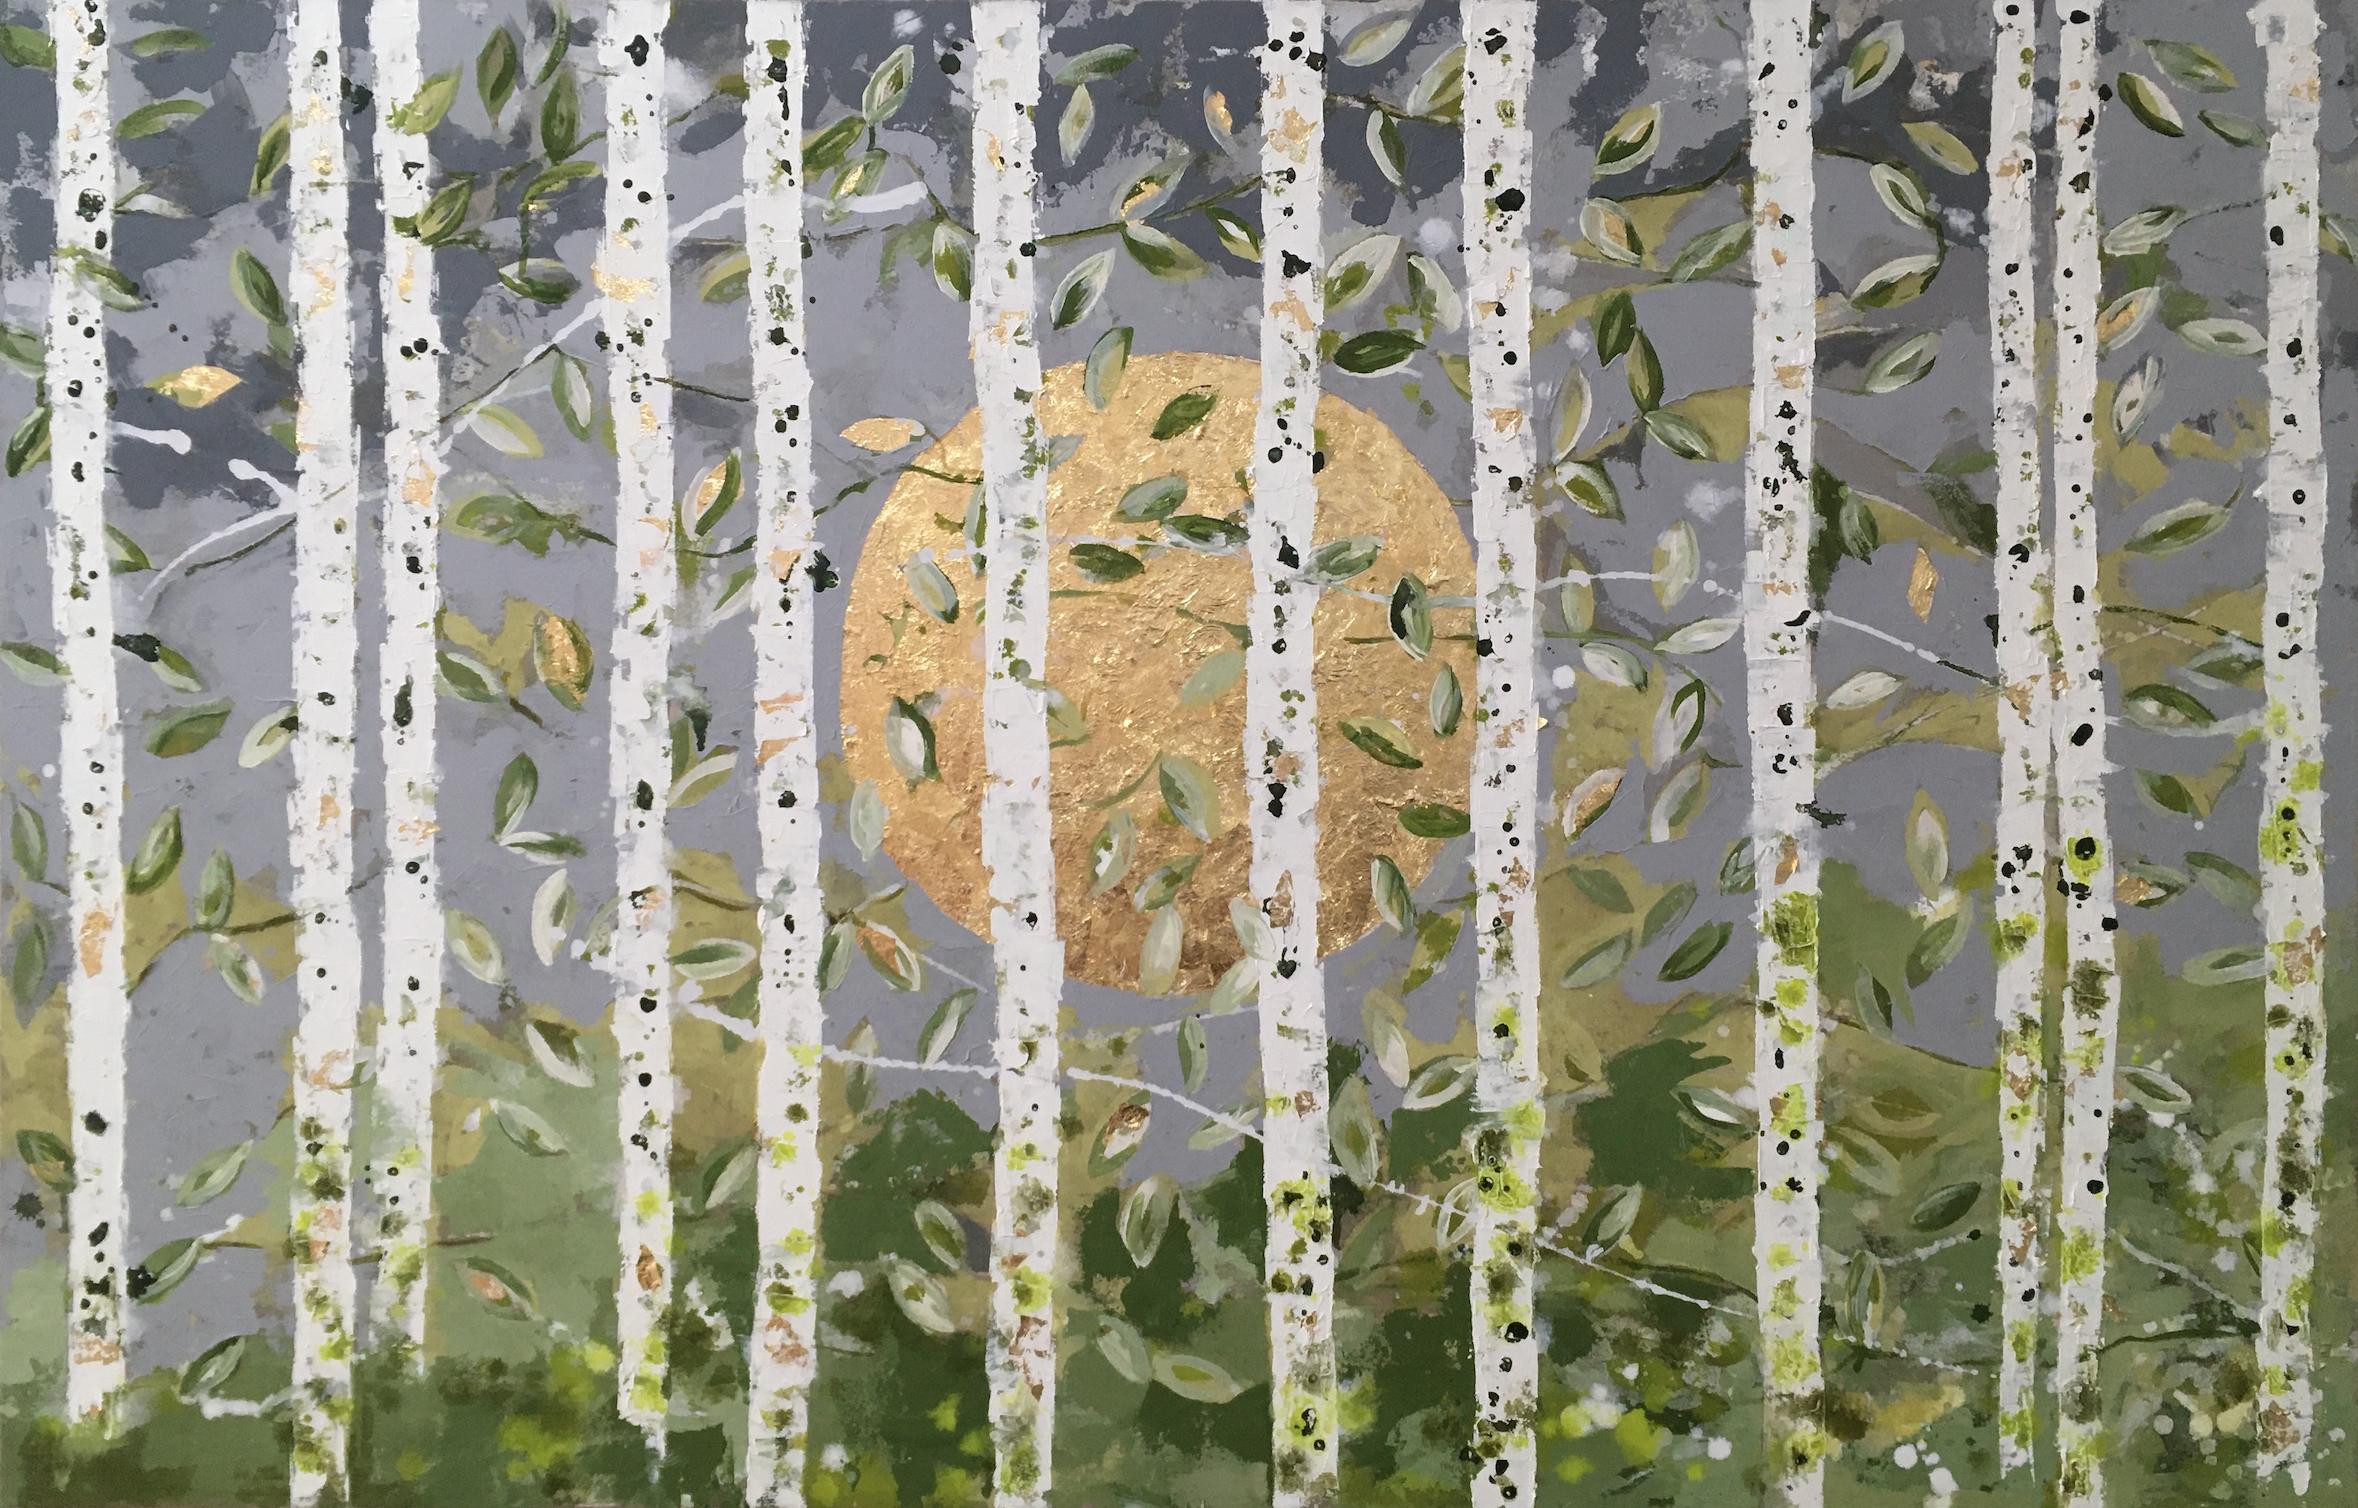 Chelsea Davine Landscape Painting -  Pale Green Leaves - 21st Century, Contemporary, Figurative-Abstract Painting